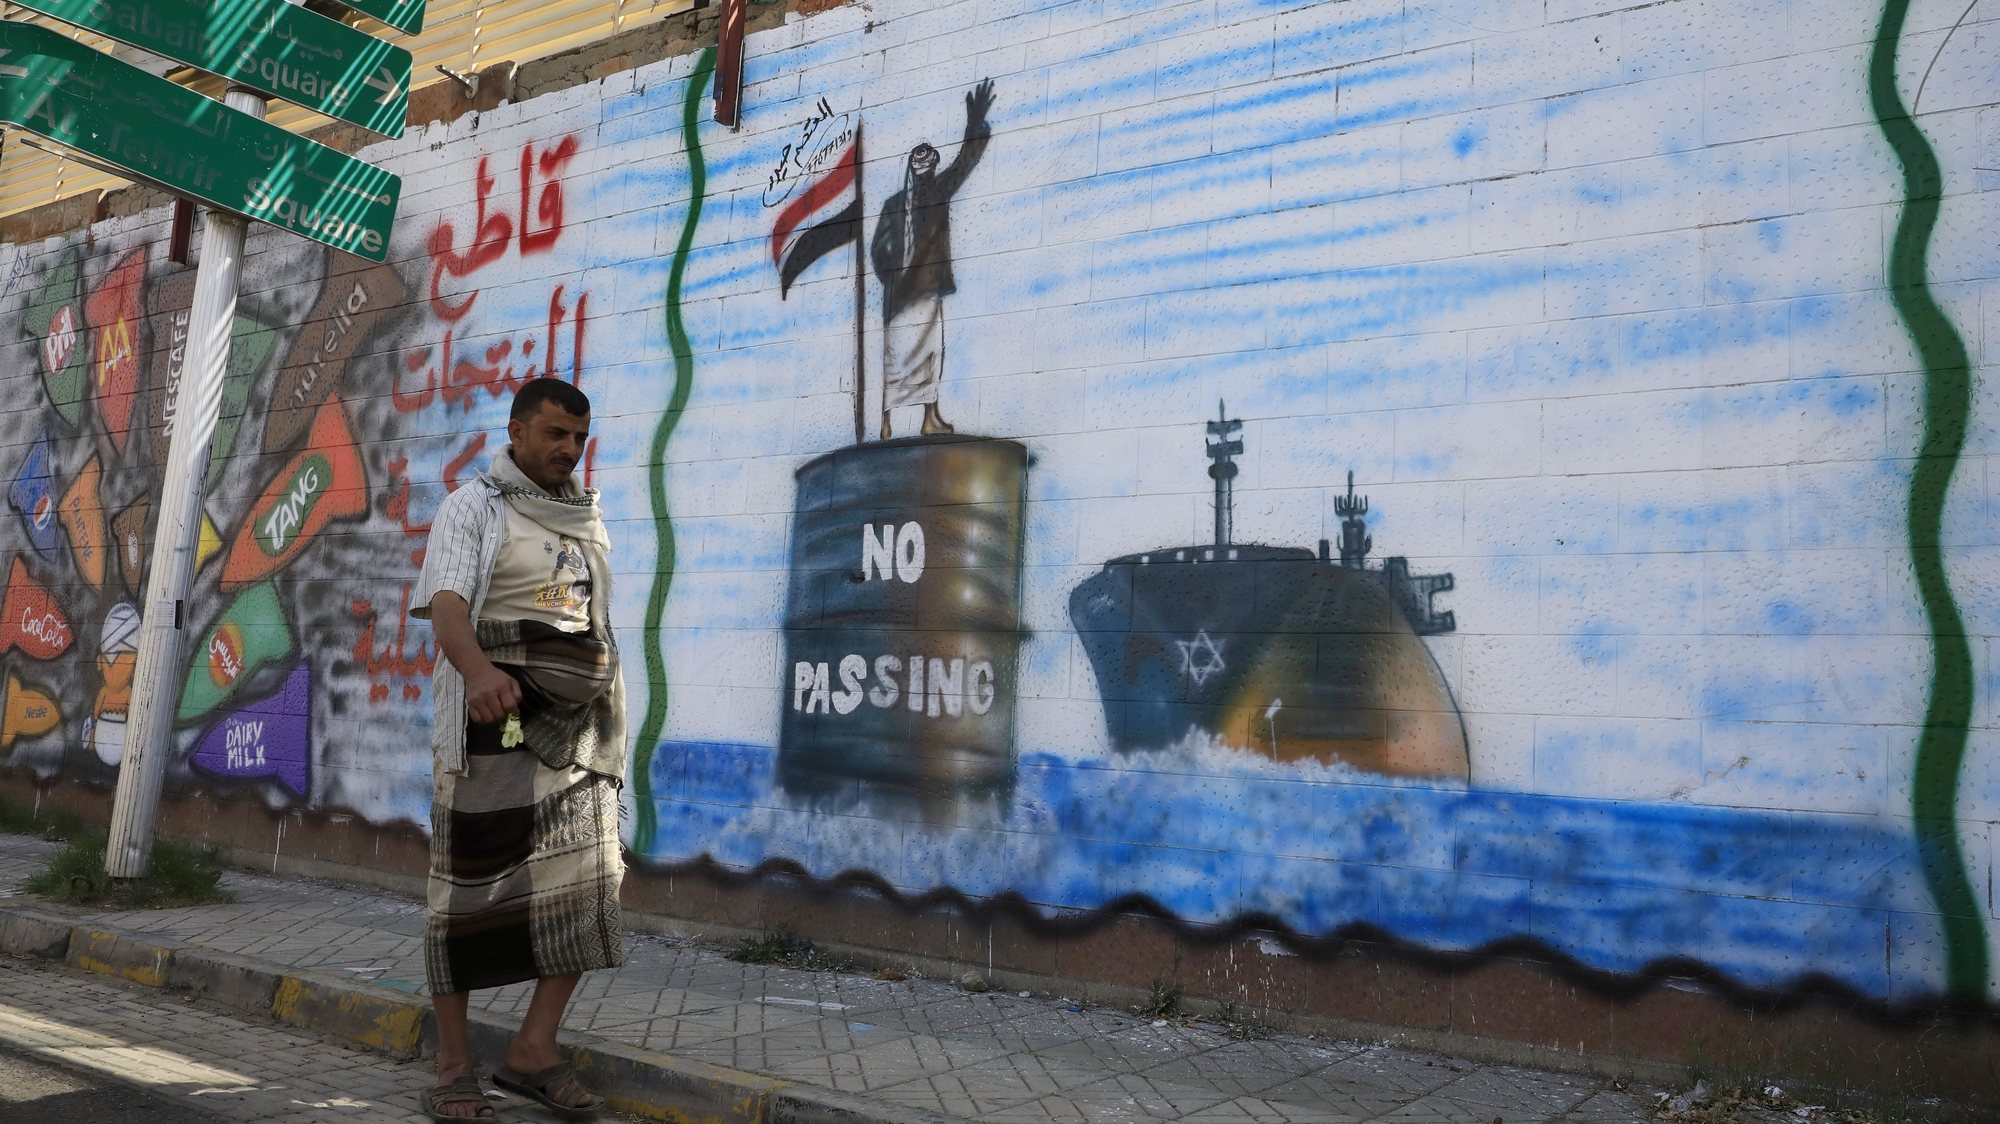 epa11166251 A person walks past a wall with graffiti depicting a Houthi fighter stopping an Israeli ship off the coast of Yemen, in Sana&#039;a, Yemen, 19 February 2024. Yemen&#039;s Houthis have claimed responsibility for a new missile attack on UK-registered cargo ship in the Gulf of Aden off the coast of Yemen, according to a statement by Houthi military spokesman Yahya Sarea. The attack came just a day after the US forces launched five strikes on Houthi targets, including an unmanned underwater vessel. The US designation of Yemen&#039;s Houthis as a &#039;Specially Designated Global Terrorist group&#039; came into effect on 16 February, due to their increased attacks on shipping lanes in the Red Sea and the Gulf of Aden since November 2023. The US Department of Defense announced in December 2023 a multinational operation to safeguard trade and protect ships in the Red Sea in response to the escalation of Houthi attacks.  EPA/YAHYA ARHAB